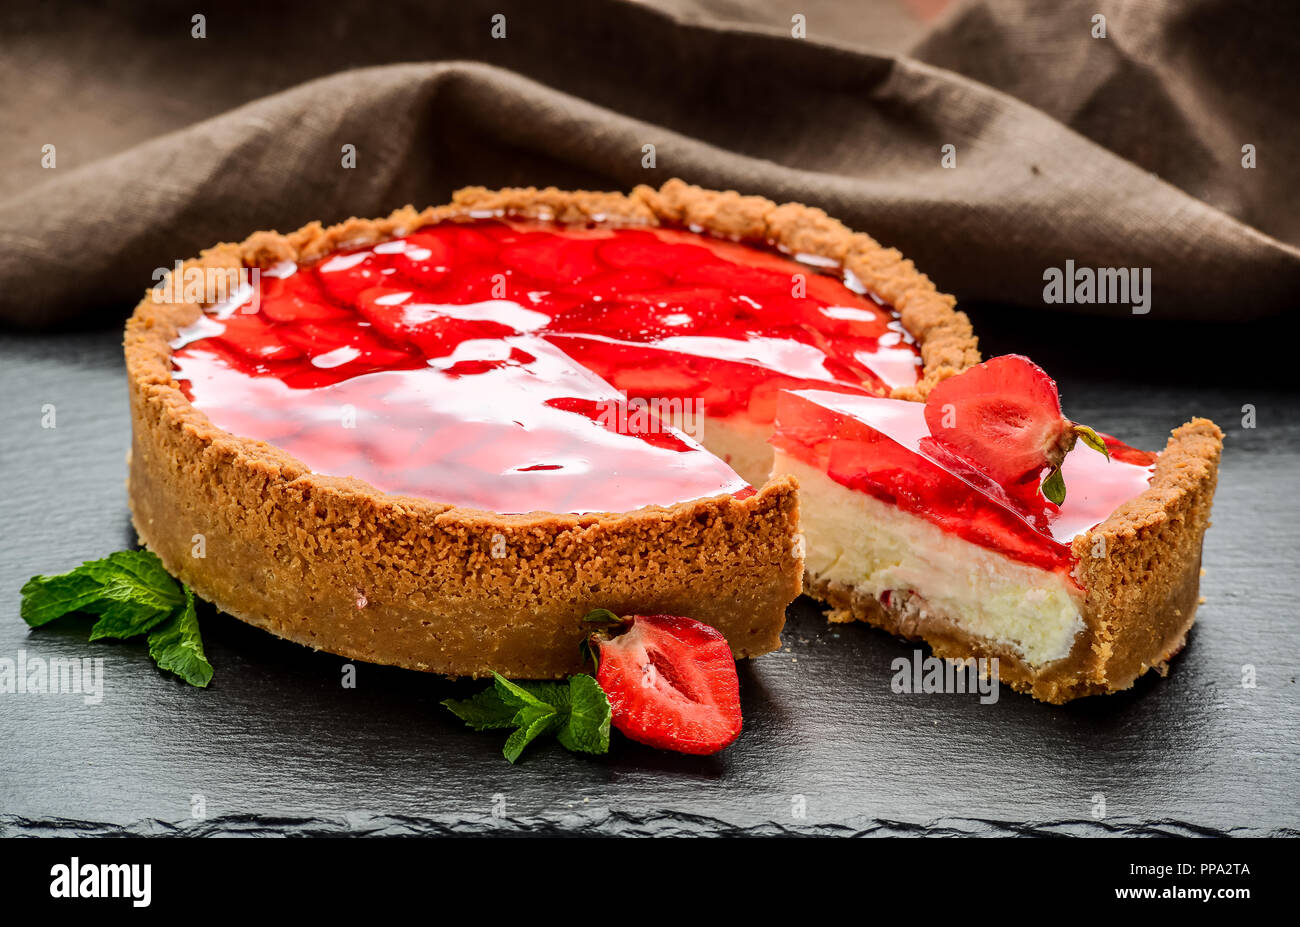 Cold cheesecake with strawberry and strawberry jelly. Stock Photo